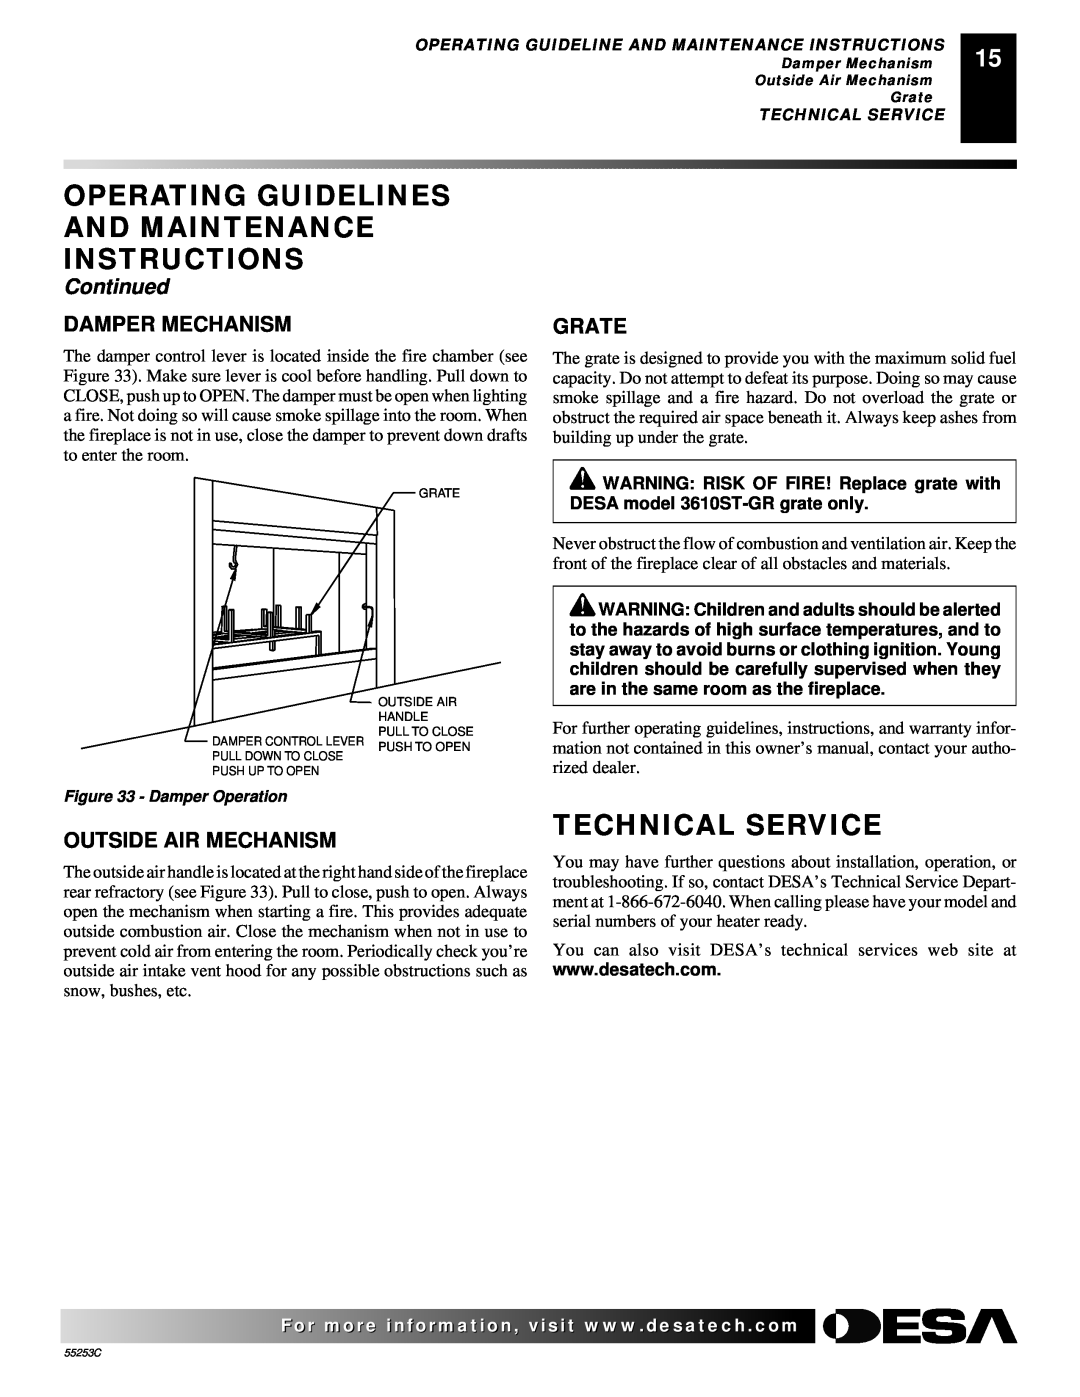 Desa V3610ST Technical Service, Operating Guidelines And Maintenance Instructions, Continued, Damper Mechanism, Grate 